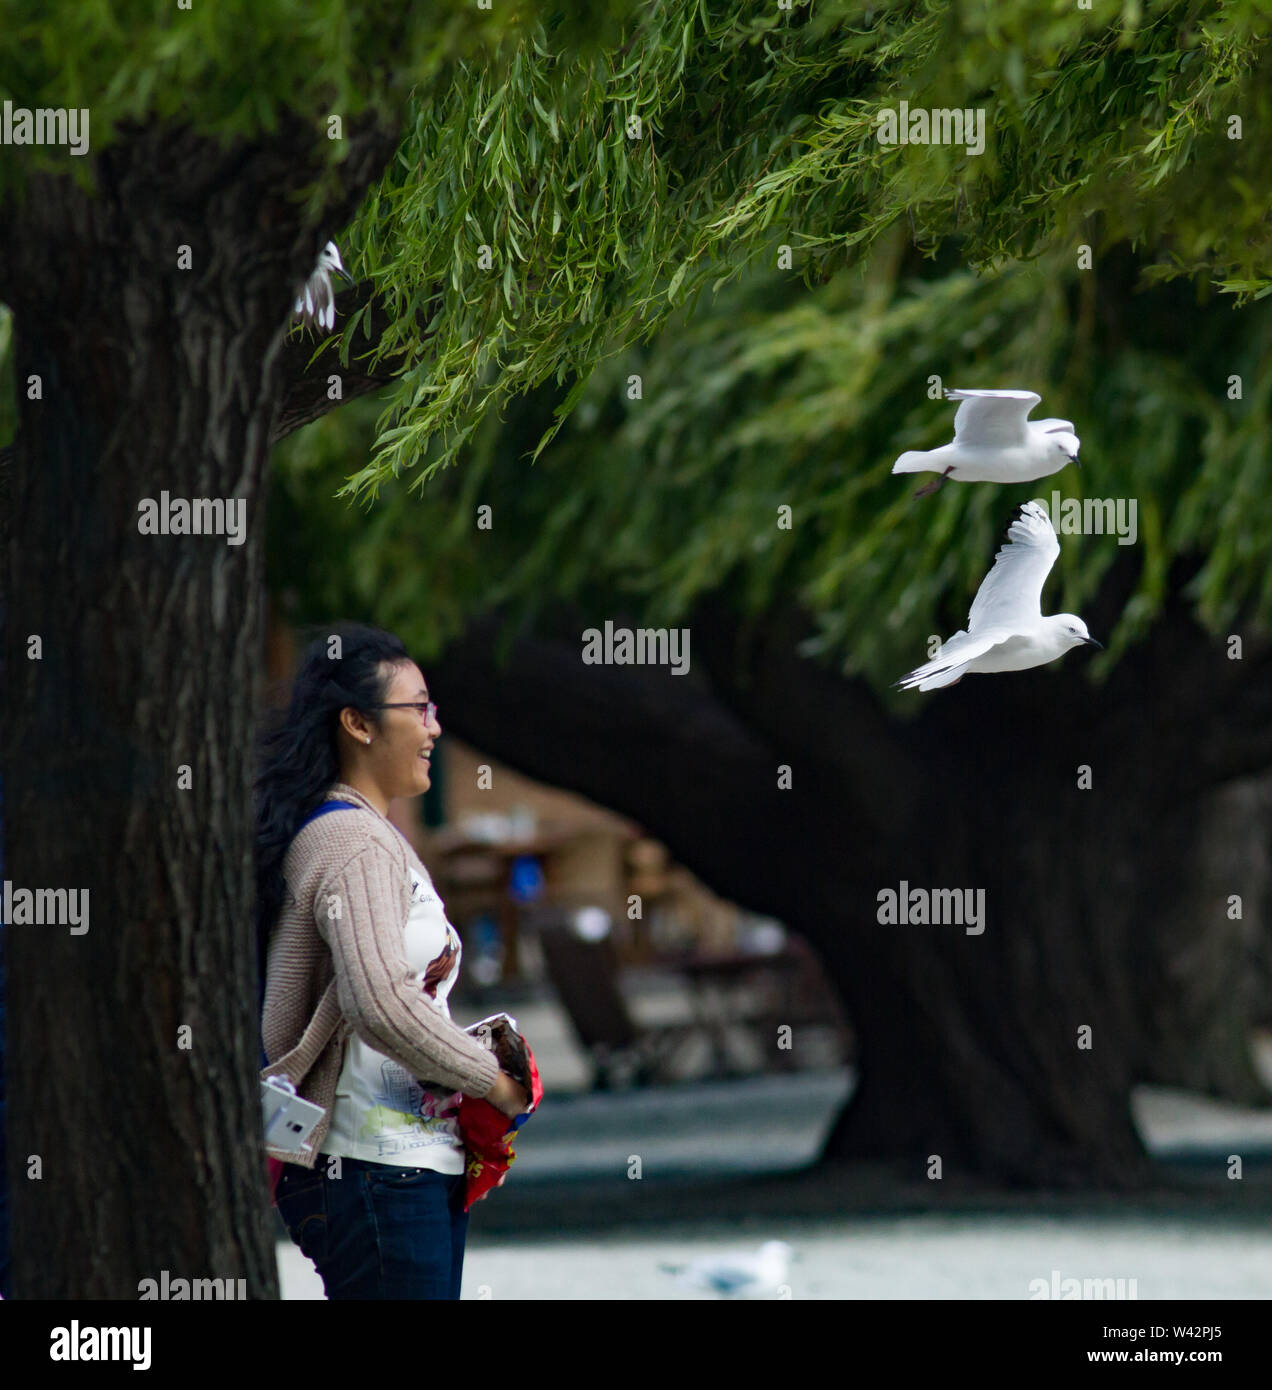 Woman with gulls in flight flying overhead Stock Photo